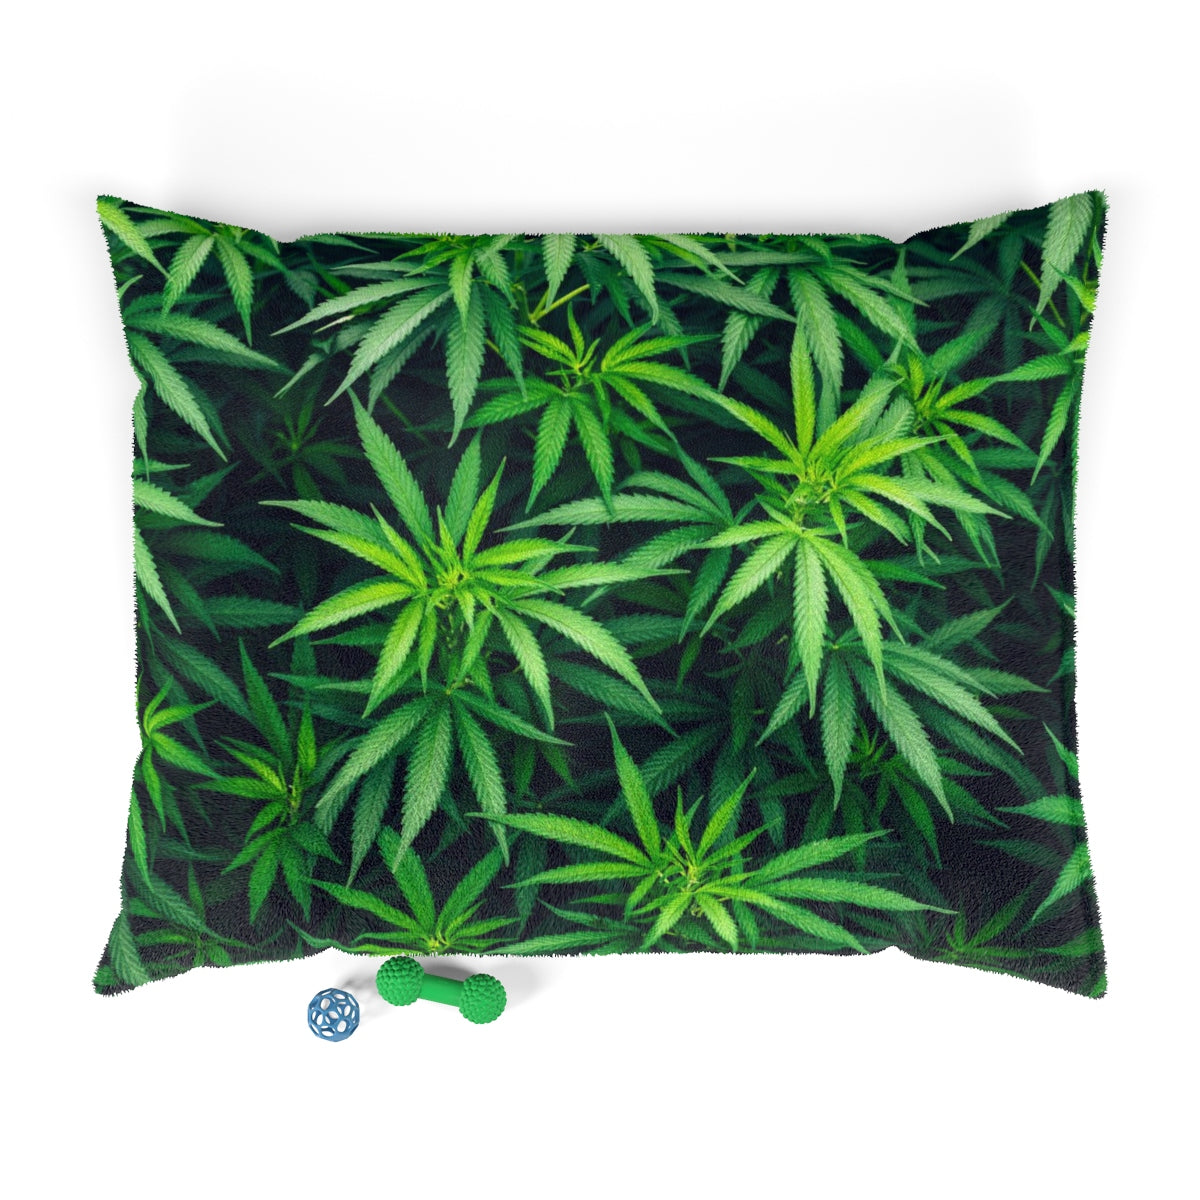 My Cannabis Pet Bed